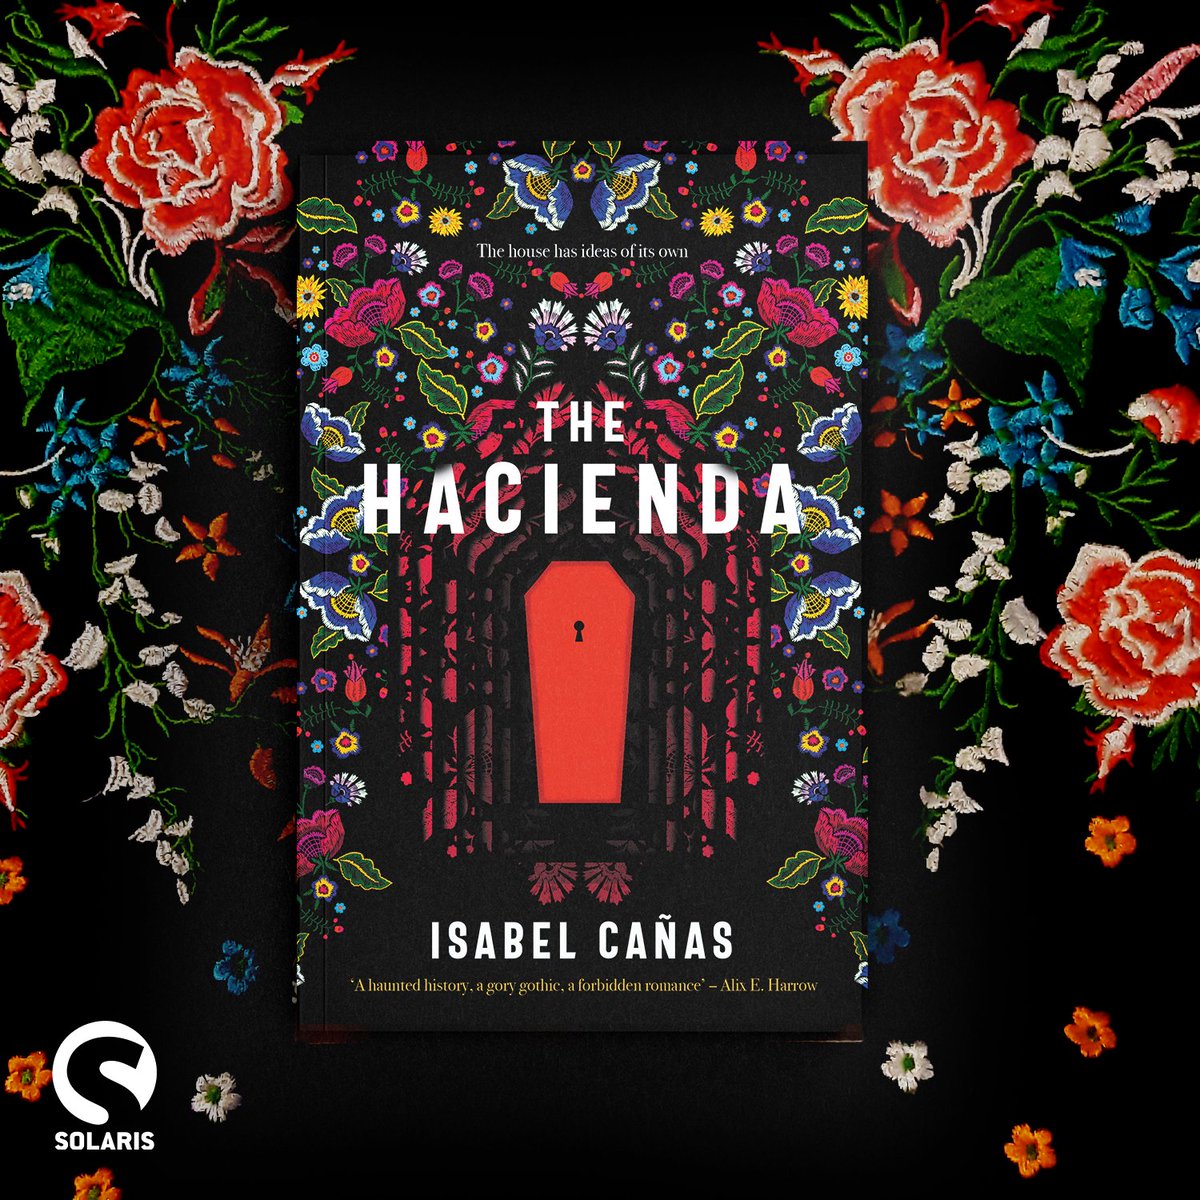 We're excited to have brought @isabelcanas_' THE HACIENDA to the UK, with new, beautiful cover art by the fabulous @KJKlim! Hacienda San Isidro was meant to be Beatriz’s haven, but this house has ideas of it's own... Pick up your own copy now! geni.us/OmXinM